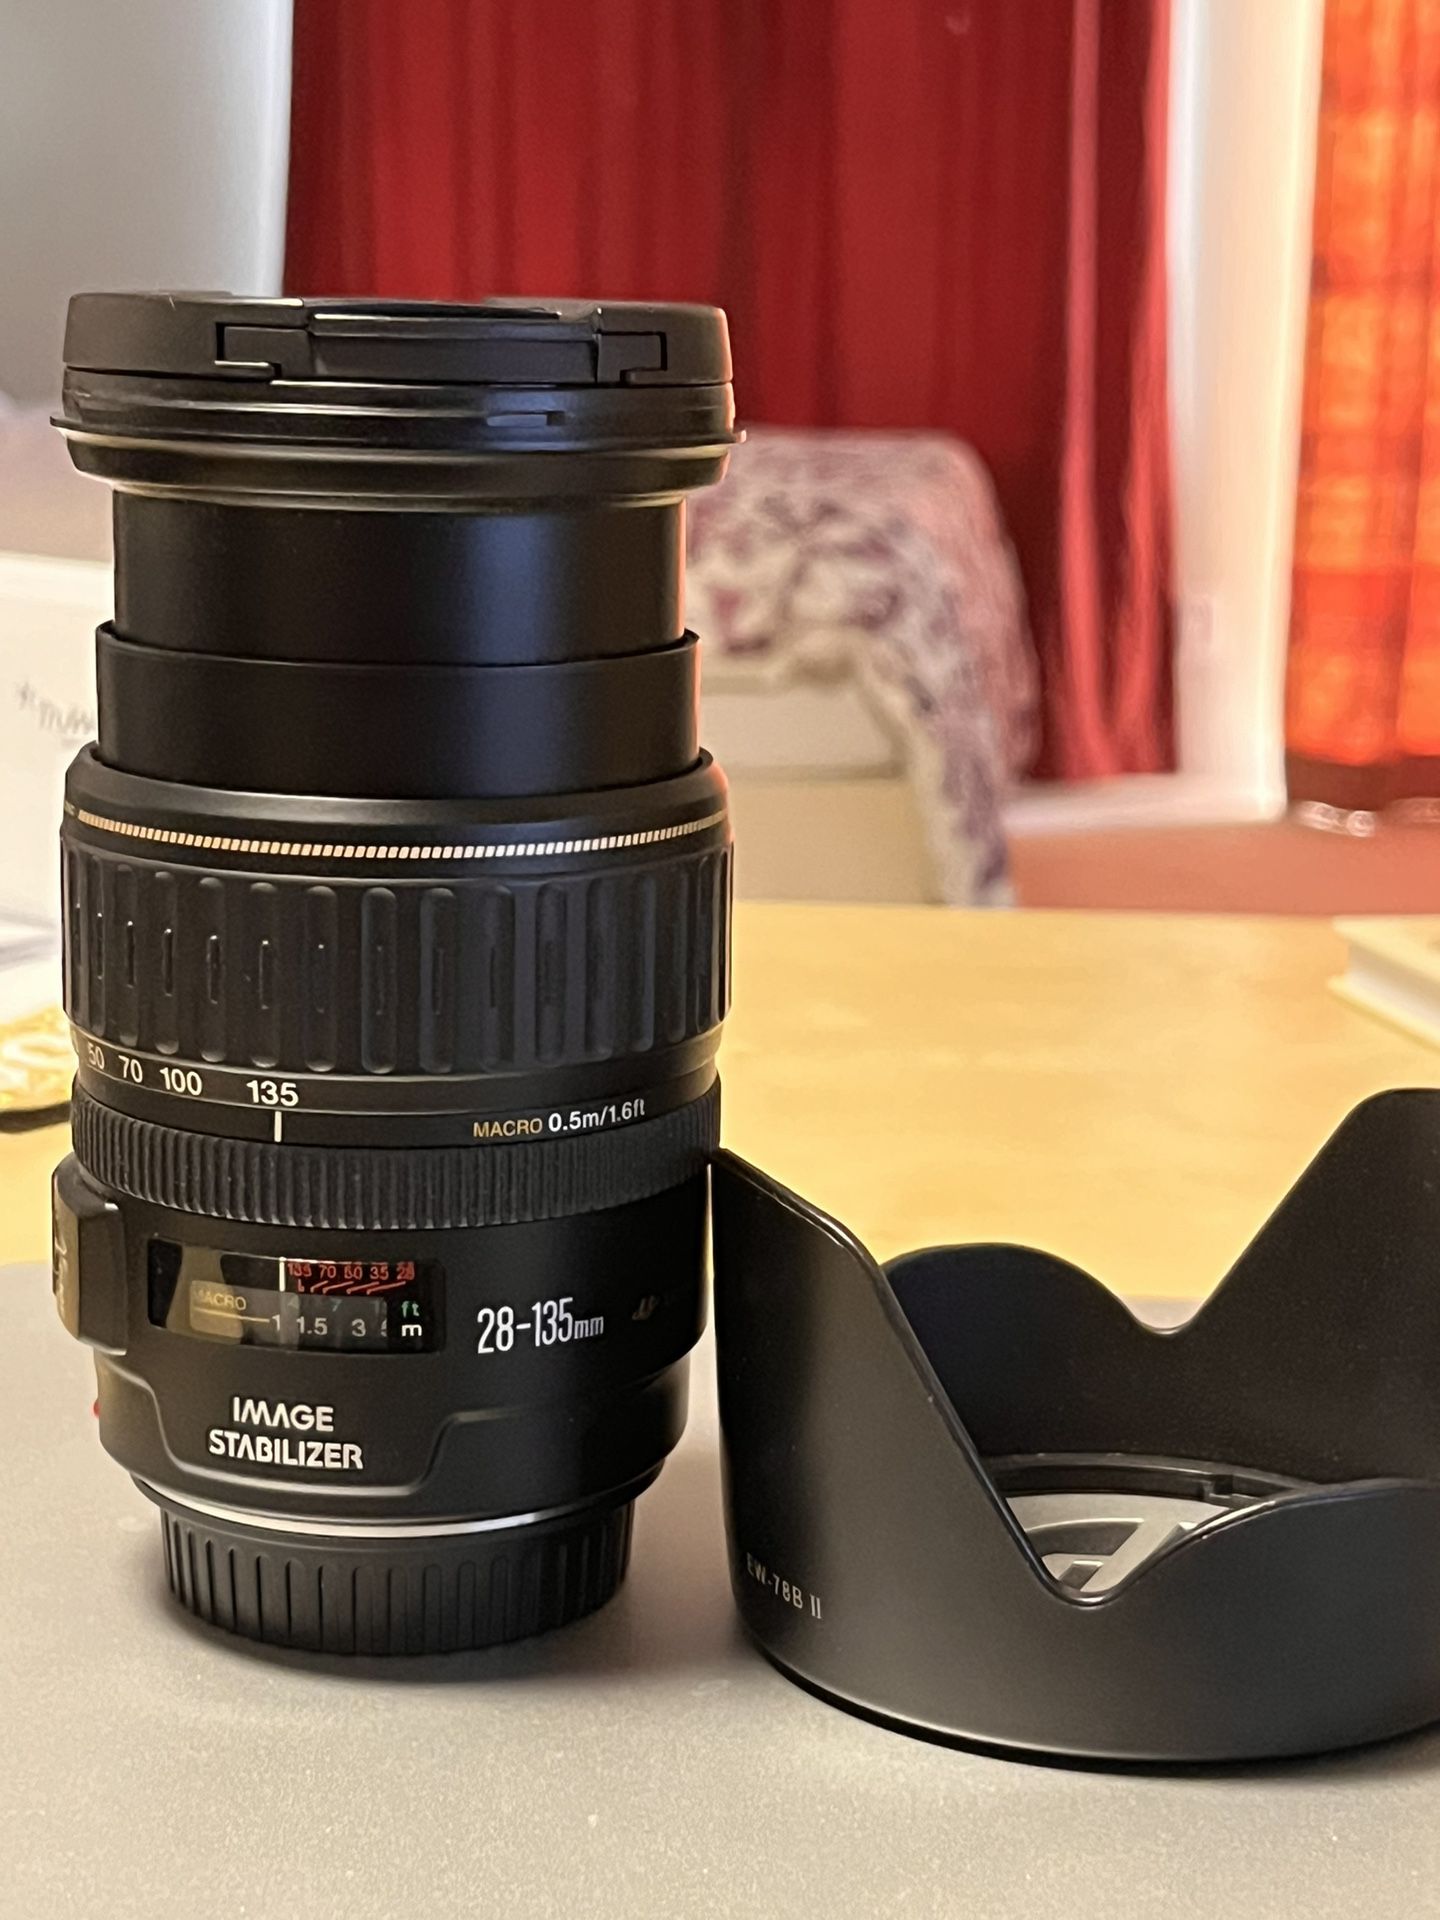 Canon 28-135mm f/3.5-5.6 IS USM Lens